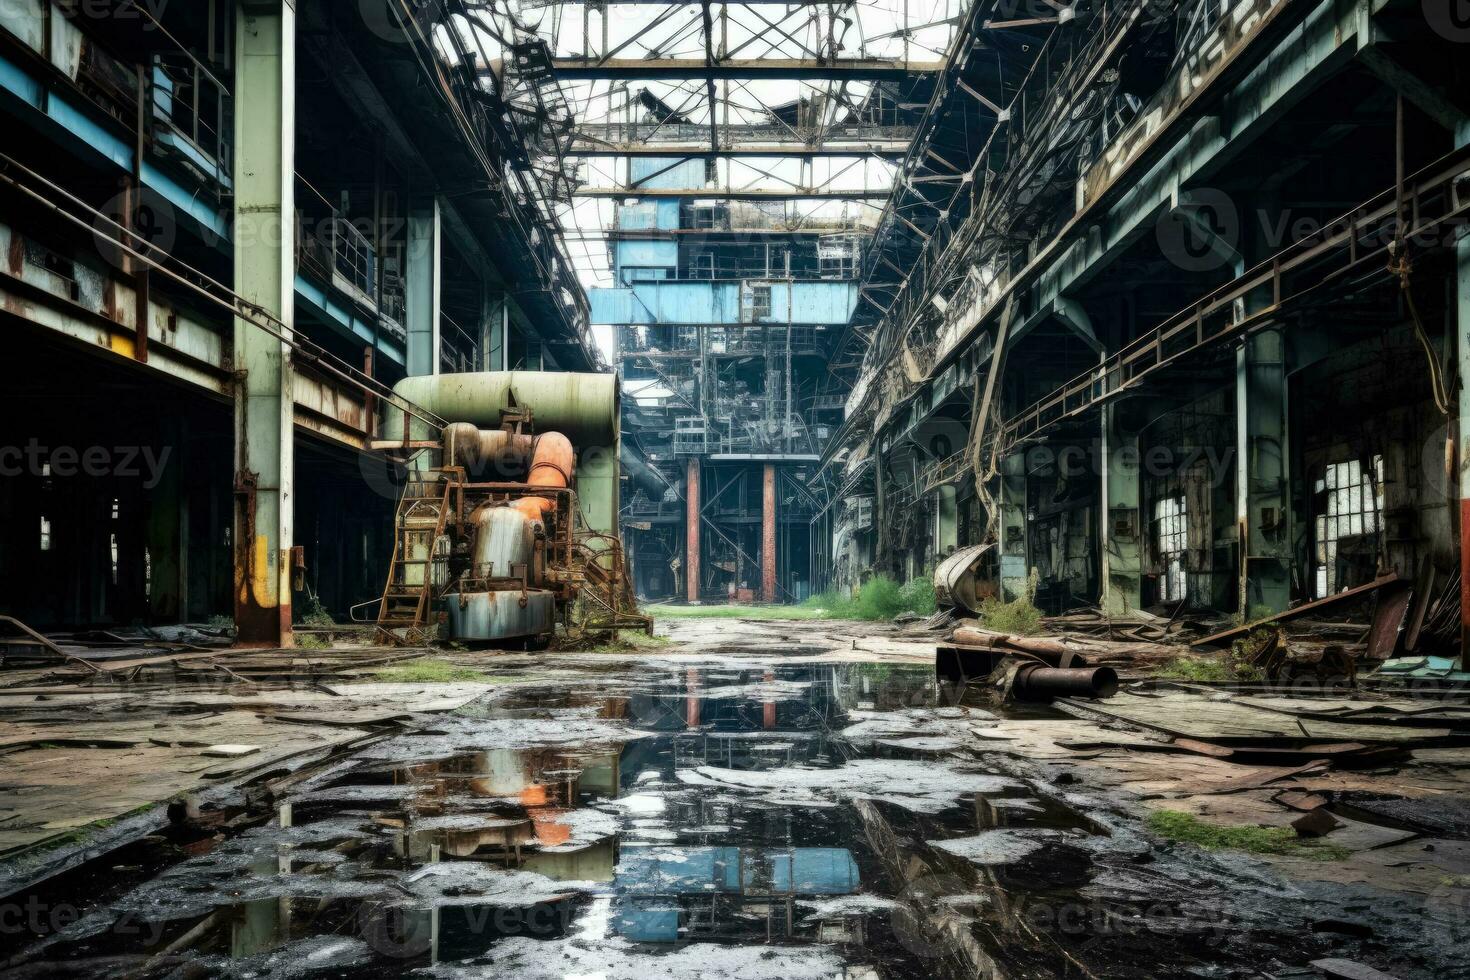 Abandoned industrial factory deteriorating under the relentless march of time photo